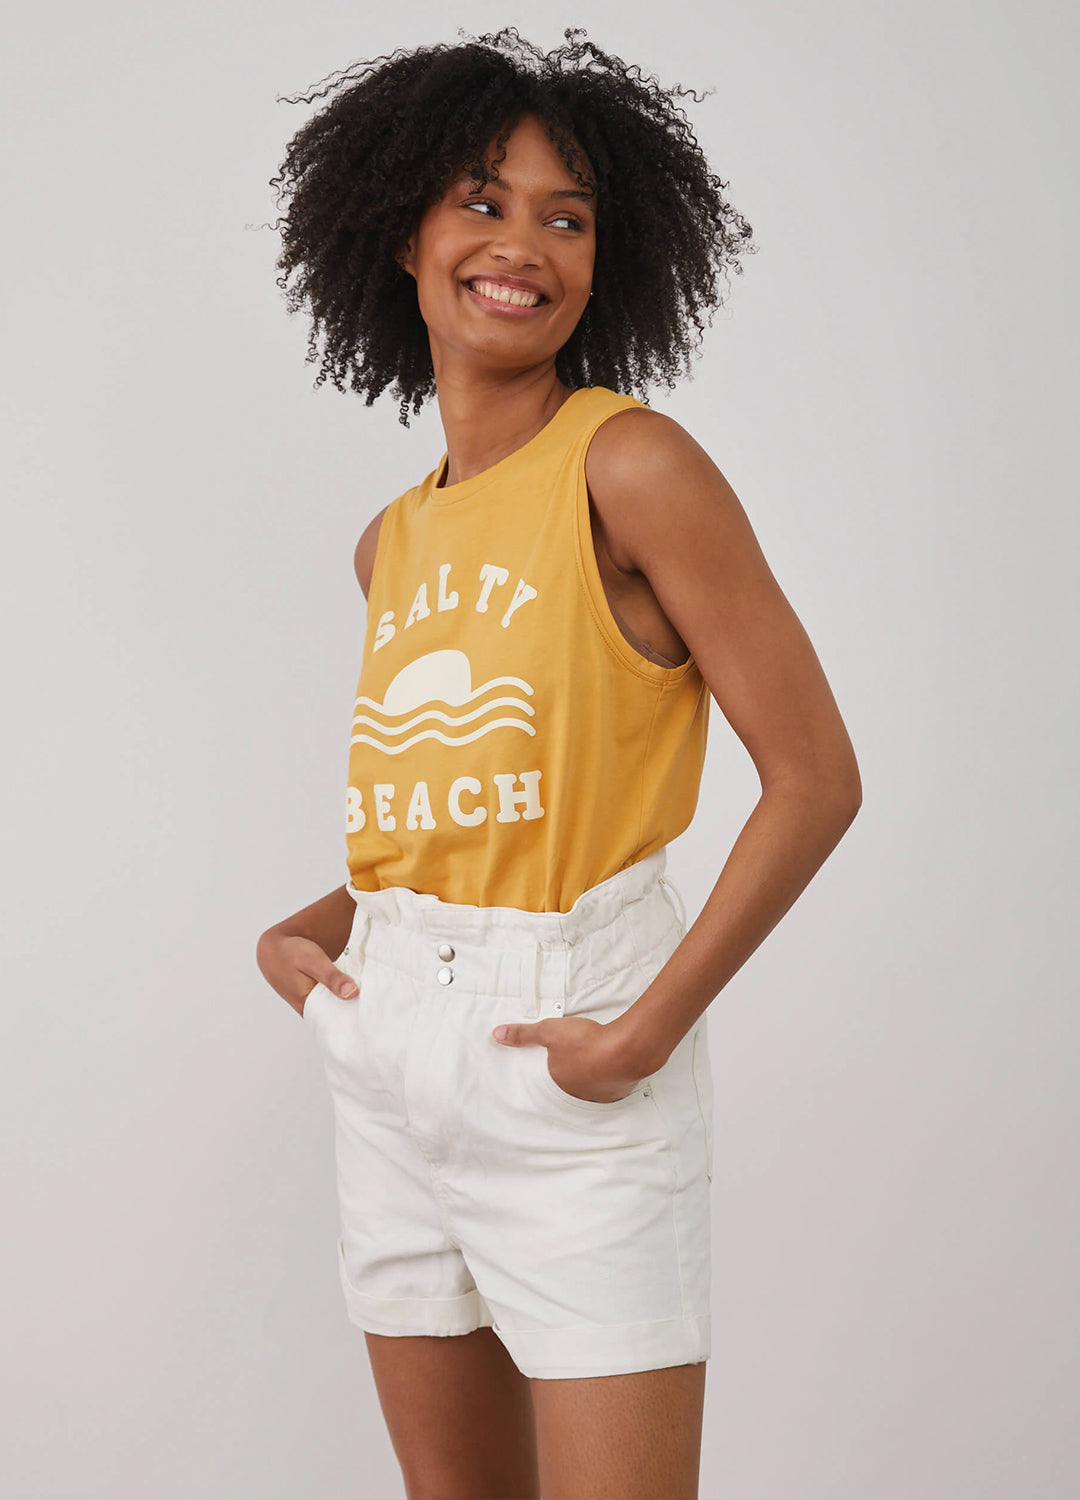 South Parade relaxed fit muscle tee adorned with Salty Beach print made of 100% Pima cotton in a happy honey yellow colour at Inner Beach Co, Toronto, Canada